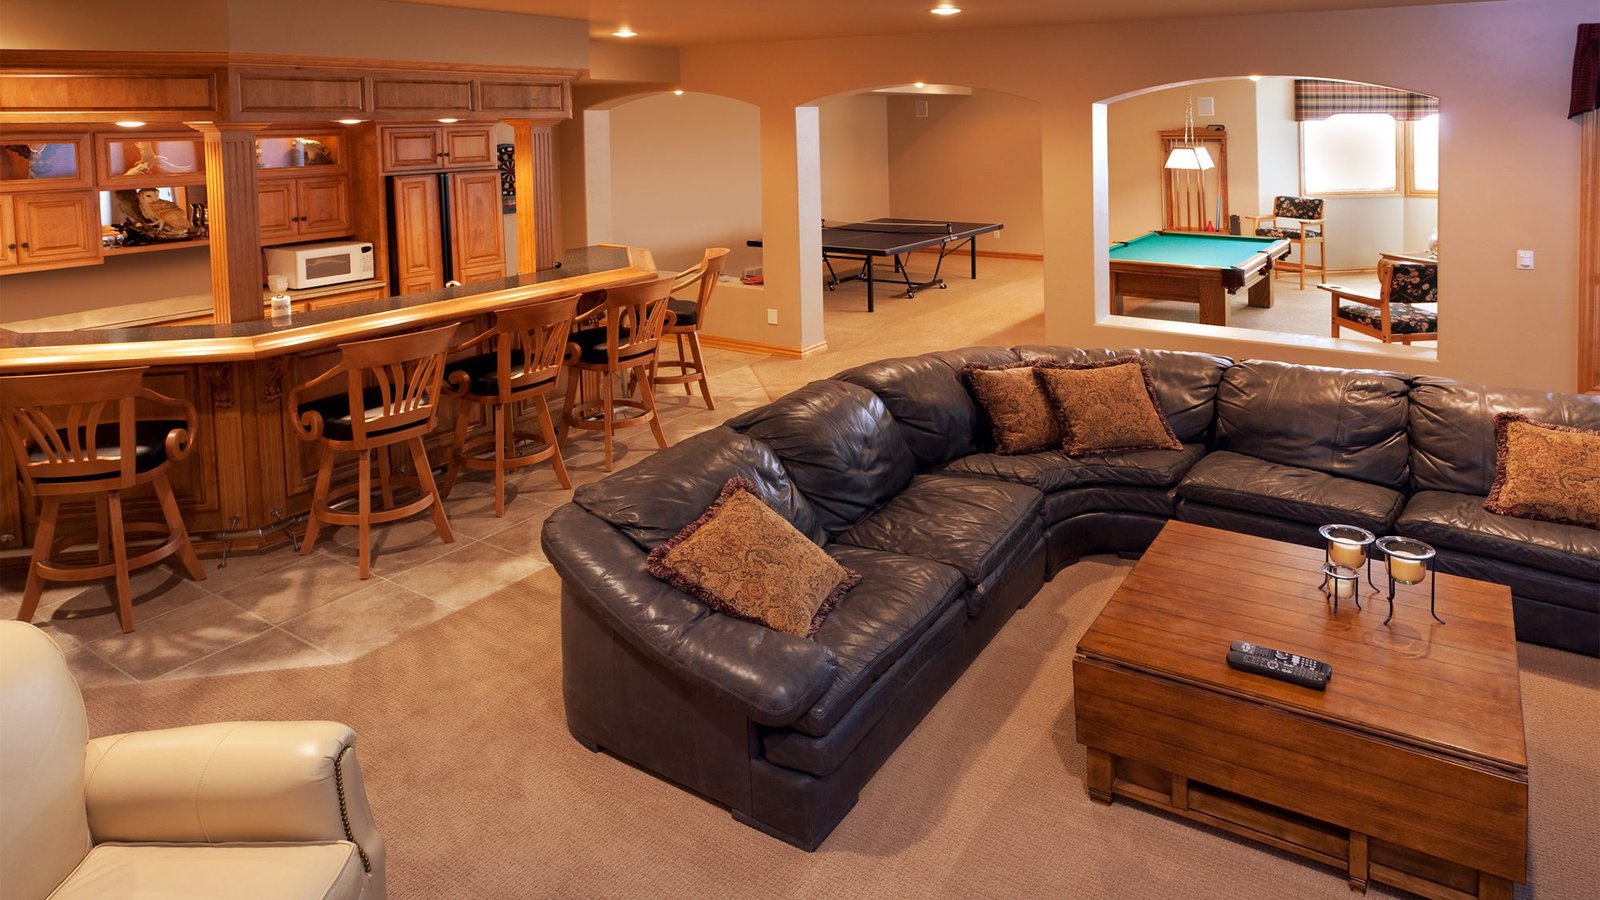 HOW TO MAKE THE BEST USE OF YOUR BASEMENT?